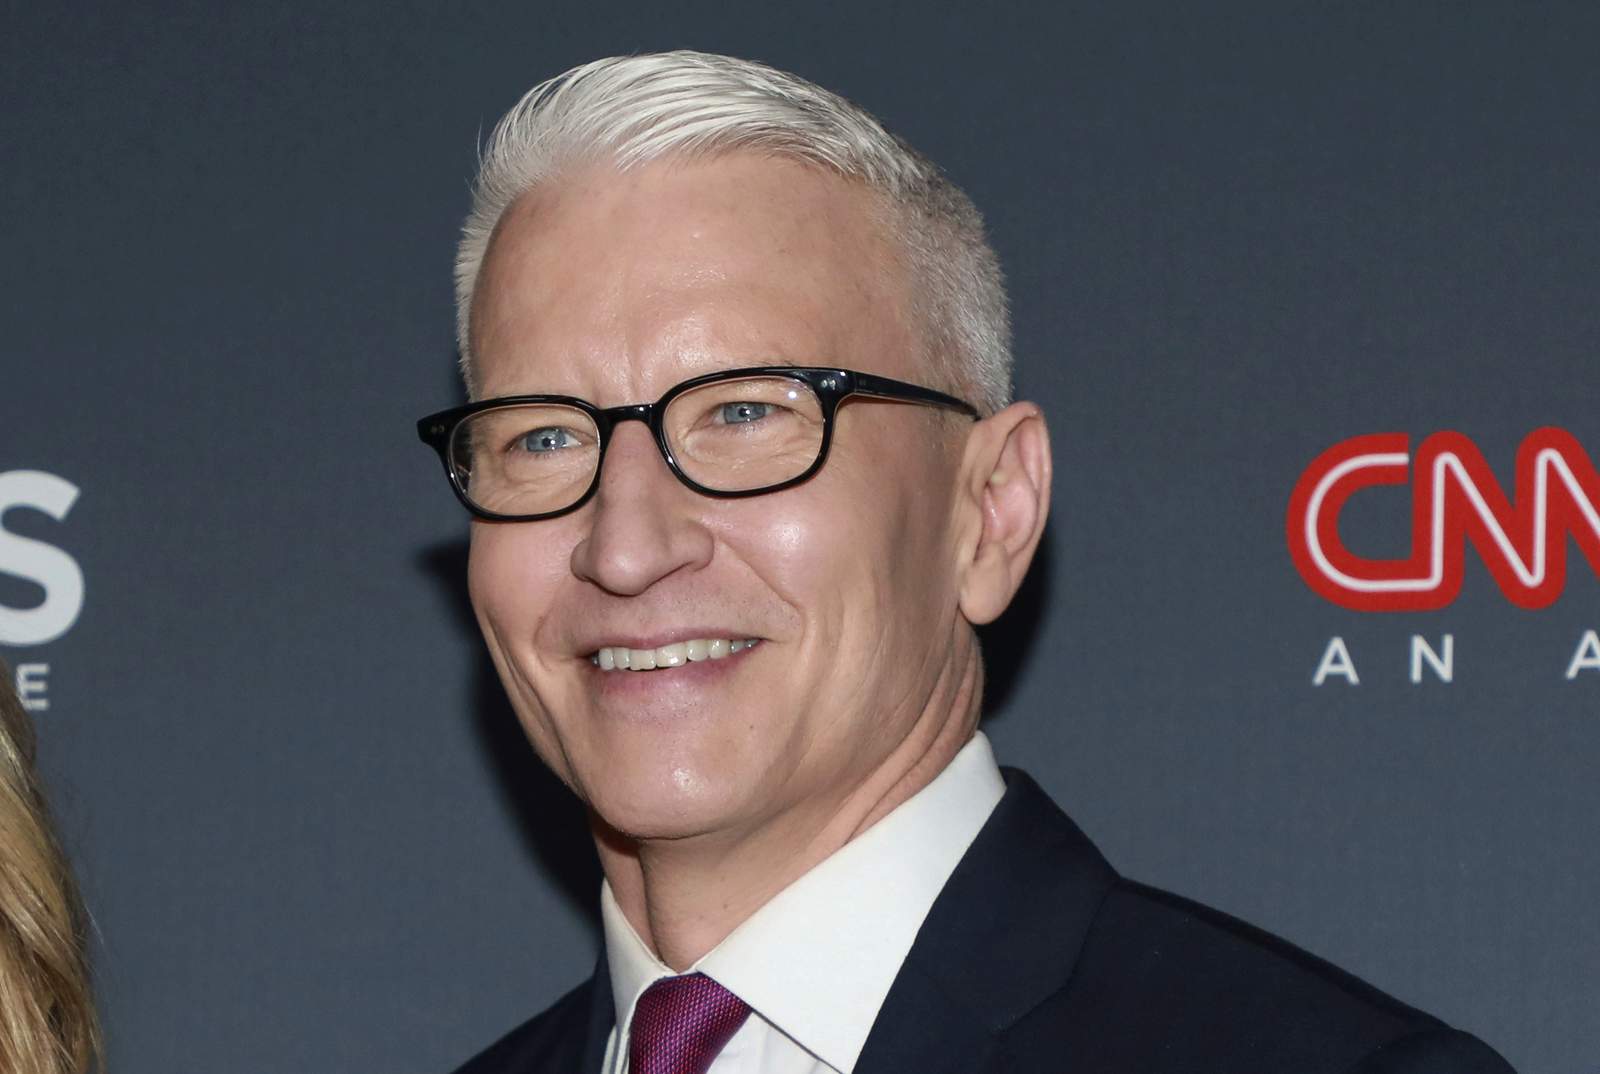 Anderson Cooper is a father; gives infant son a special name